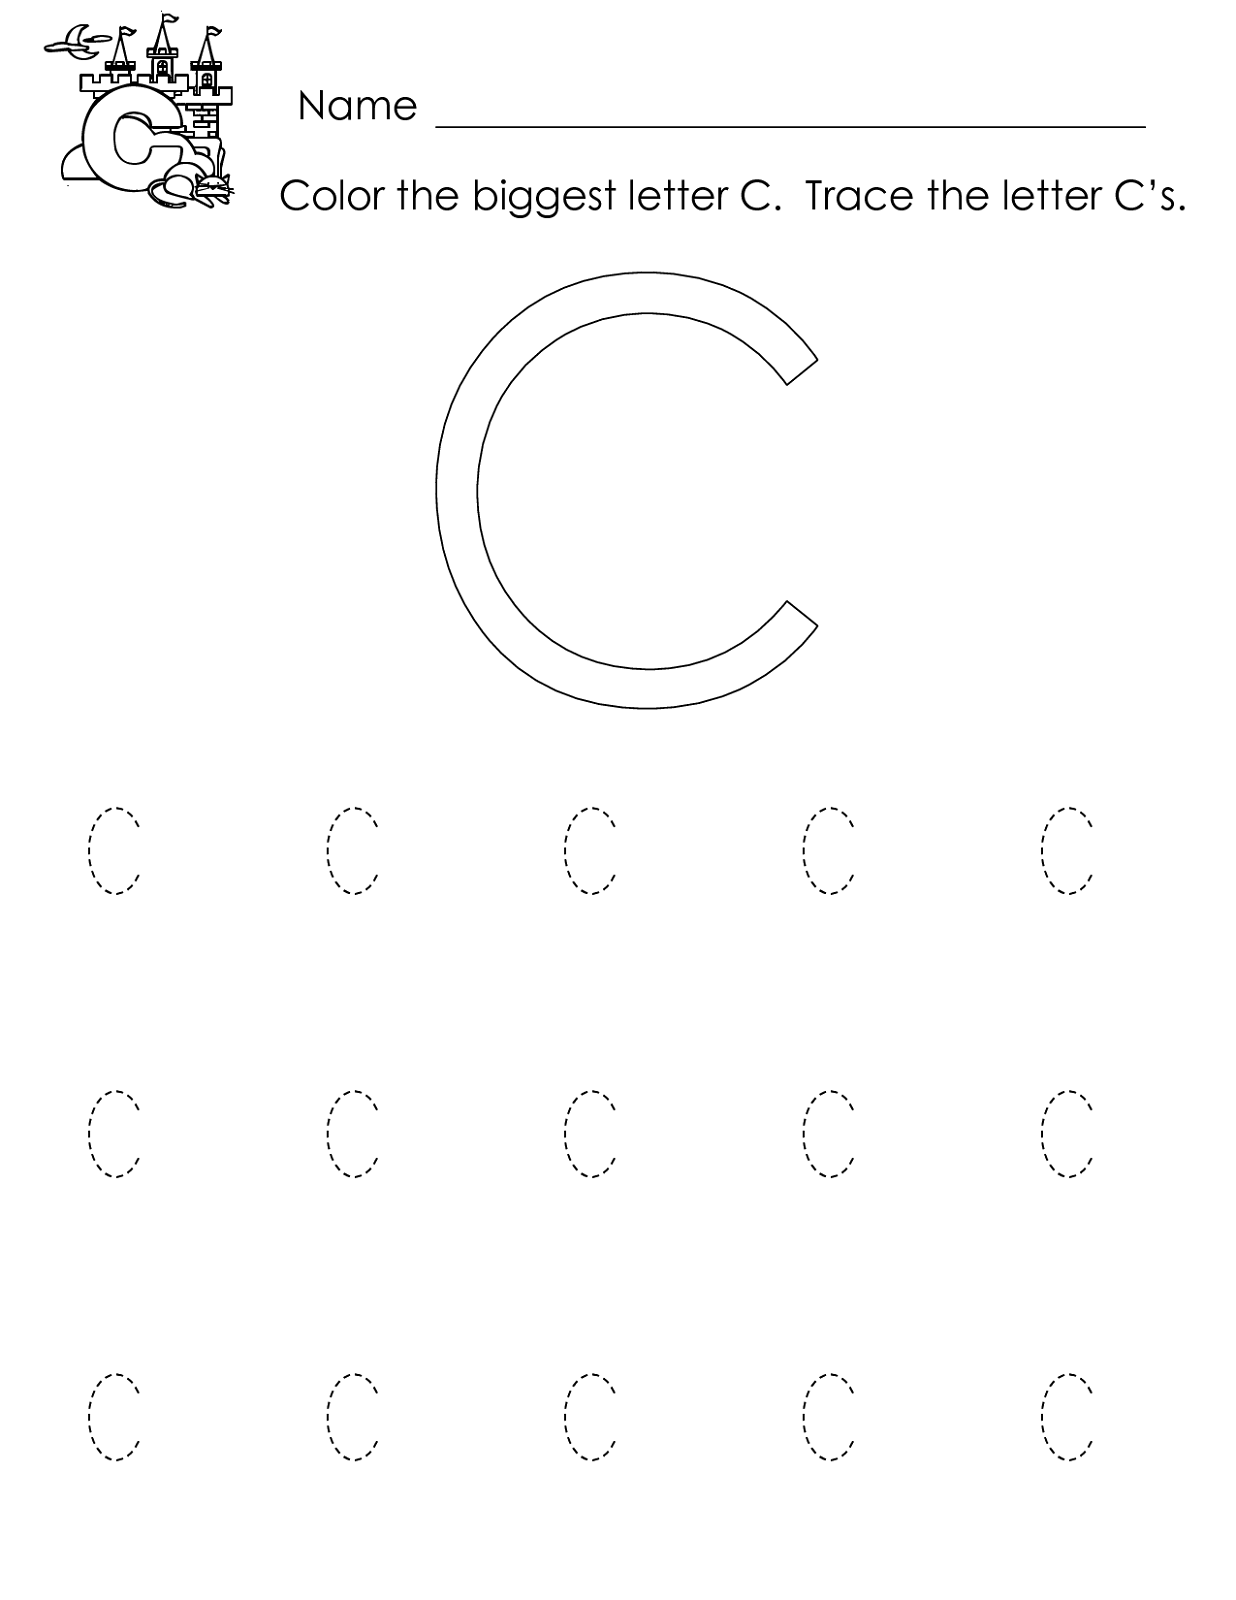 trace-the-letter-c-simple